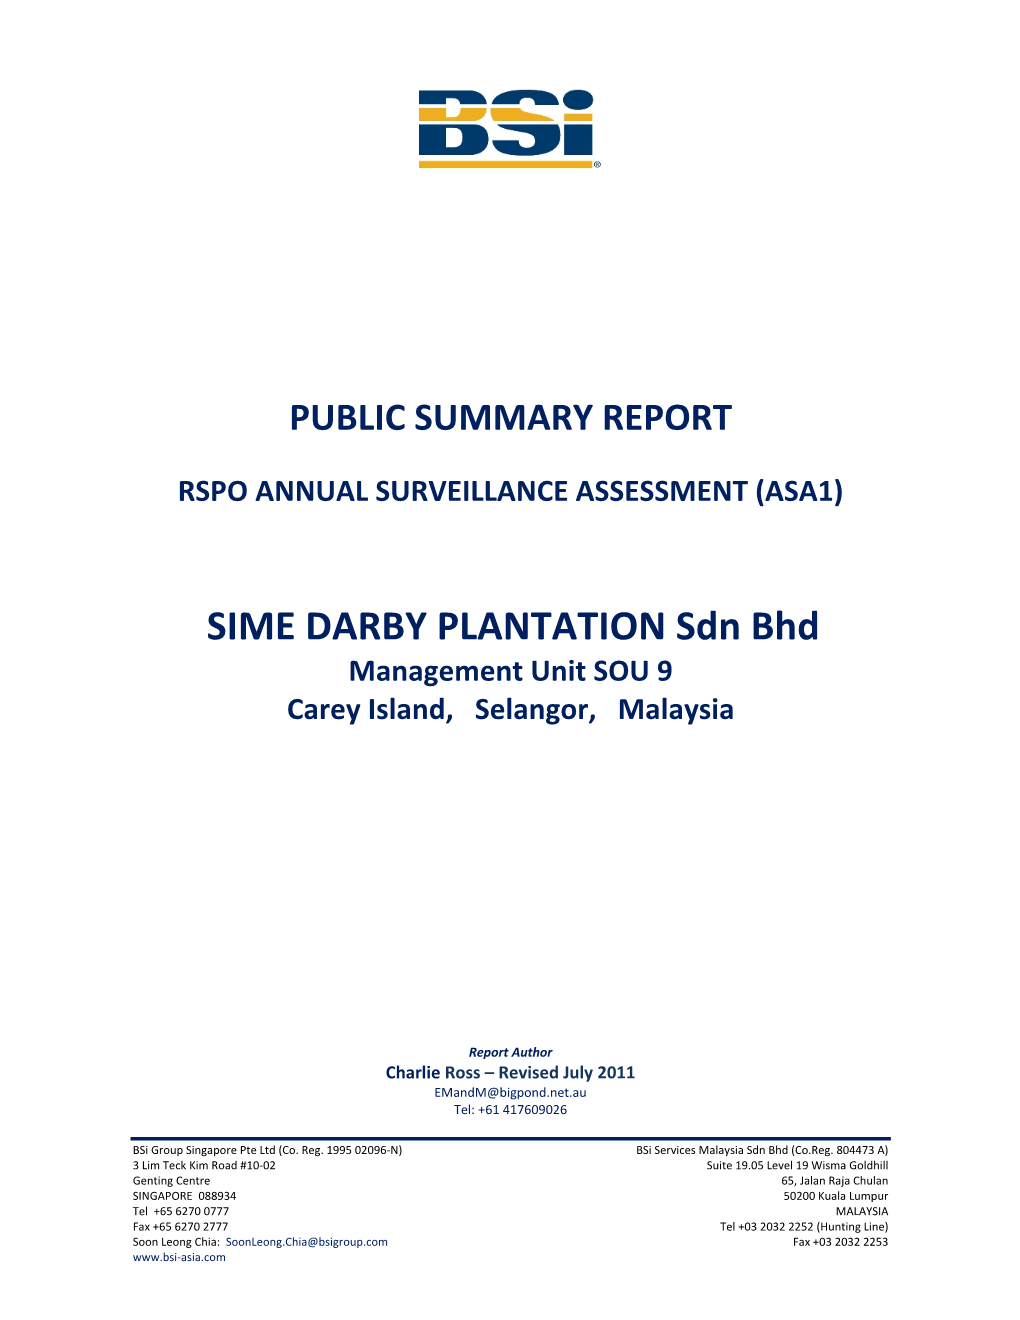 Sime Darby Plantation Sdn Bhd (SOU 9) Public Summary Report – RSPO Annual Surveillance Assessment (ASA1) Page 2